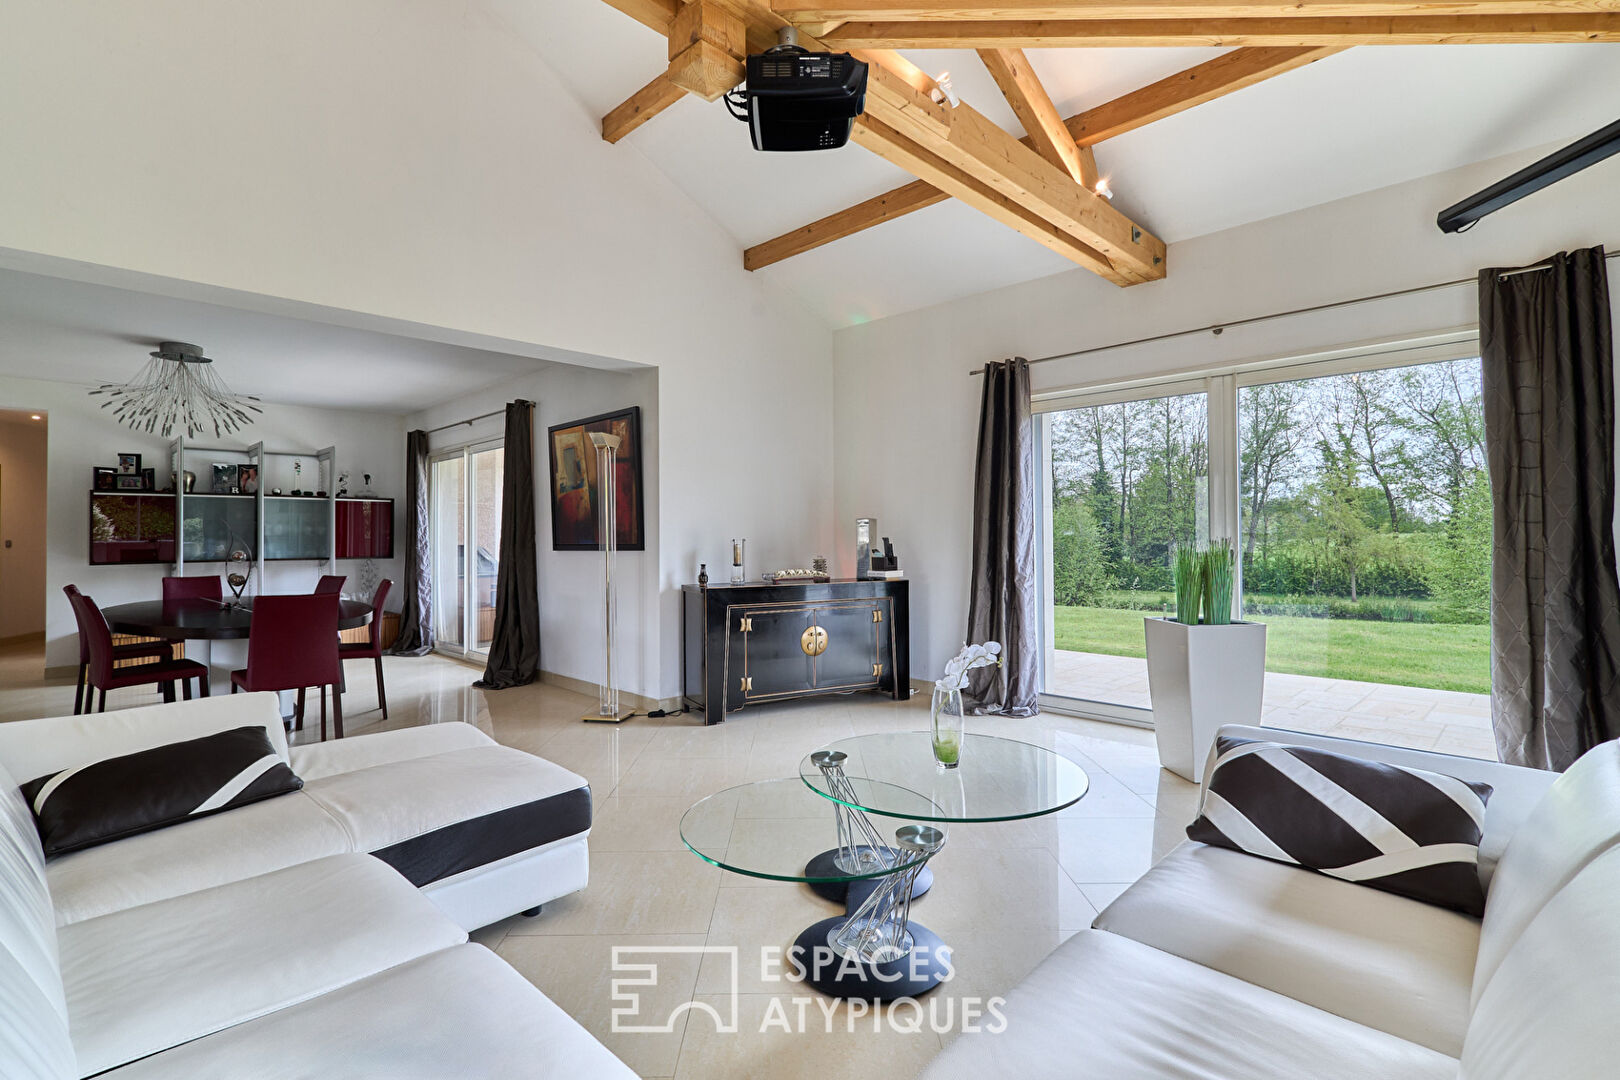 Modern comfortable villa in a park with private pond in Sermaize les Bains.